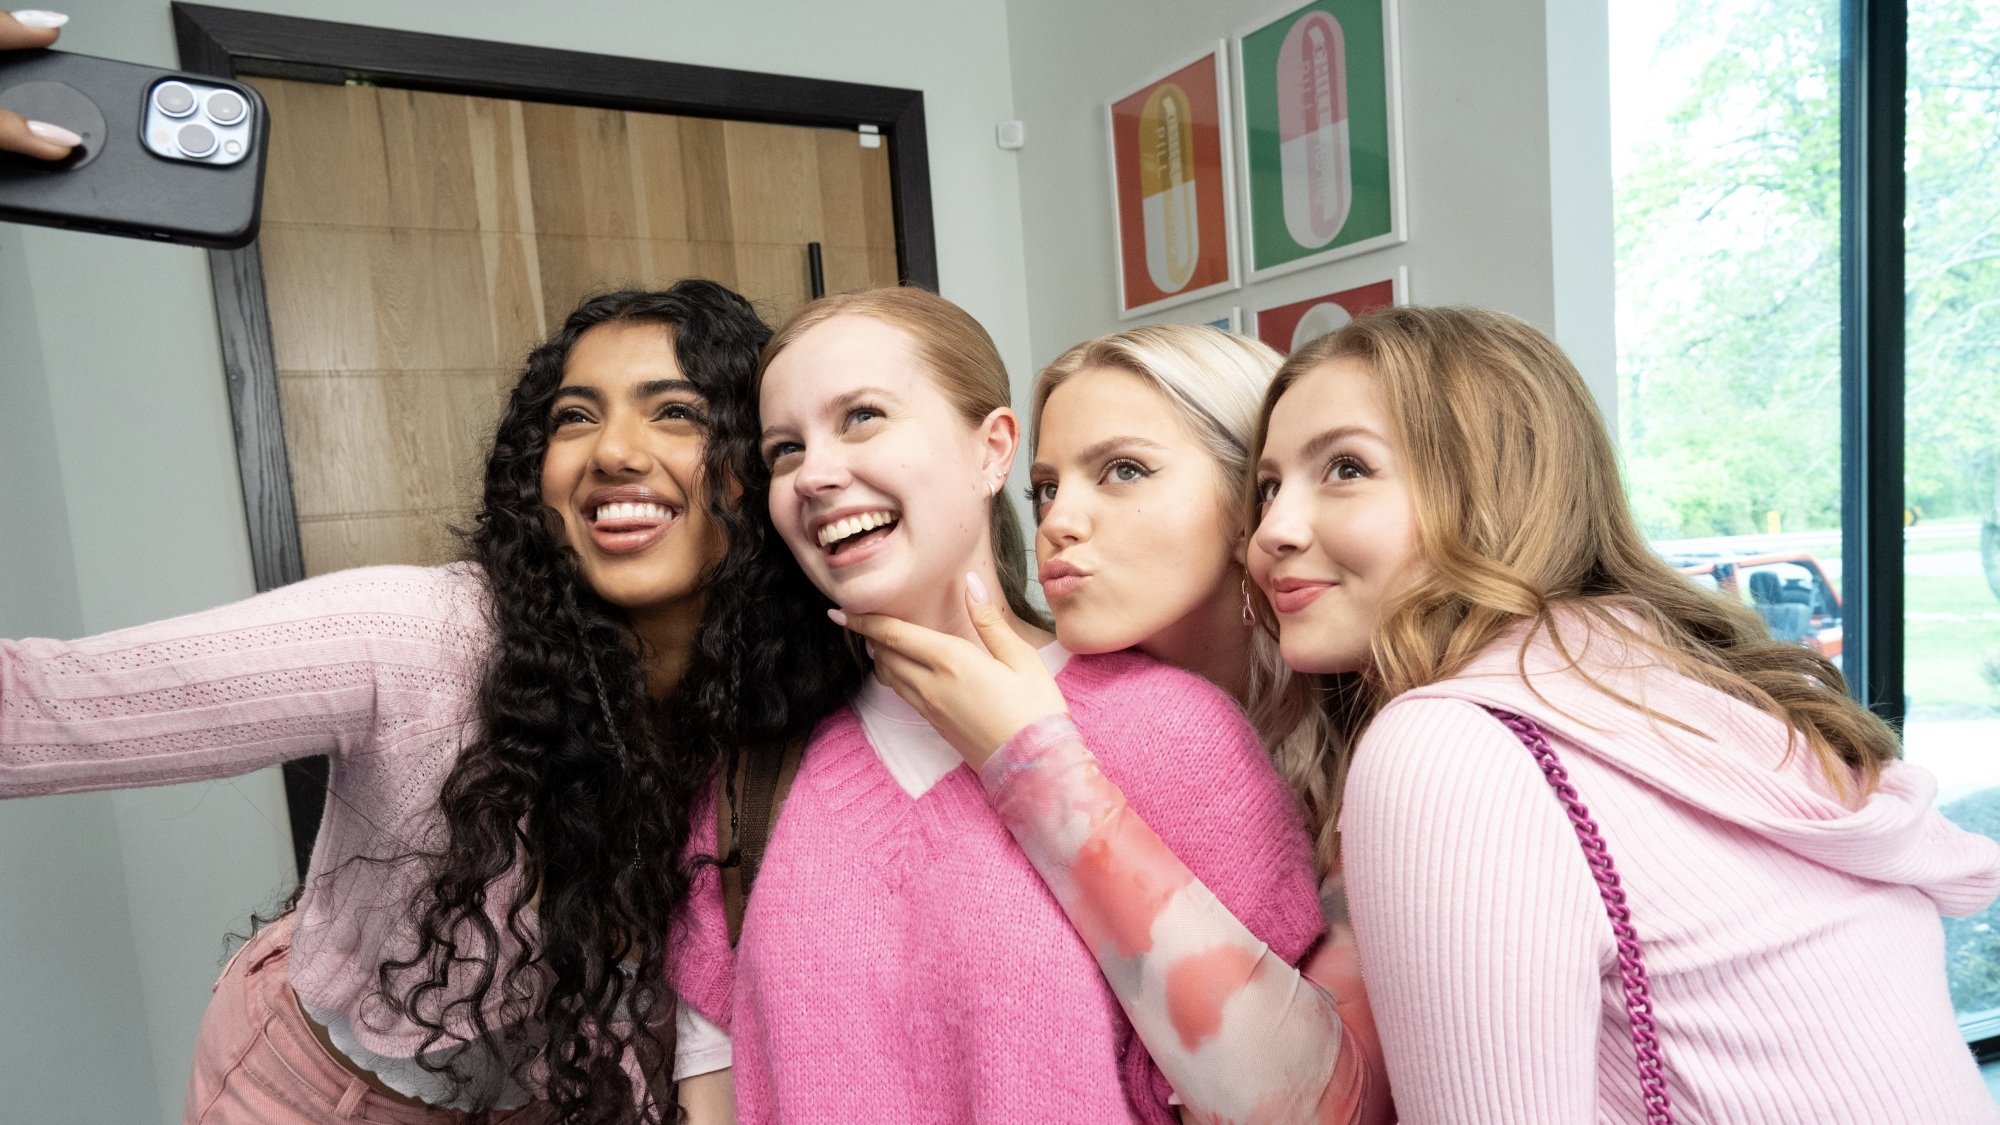 Four high school girls in pink outfits pose for a selfie.